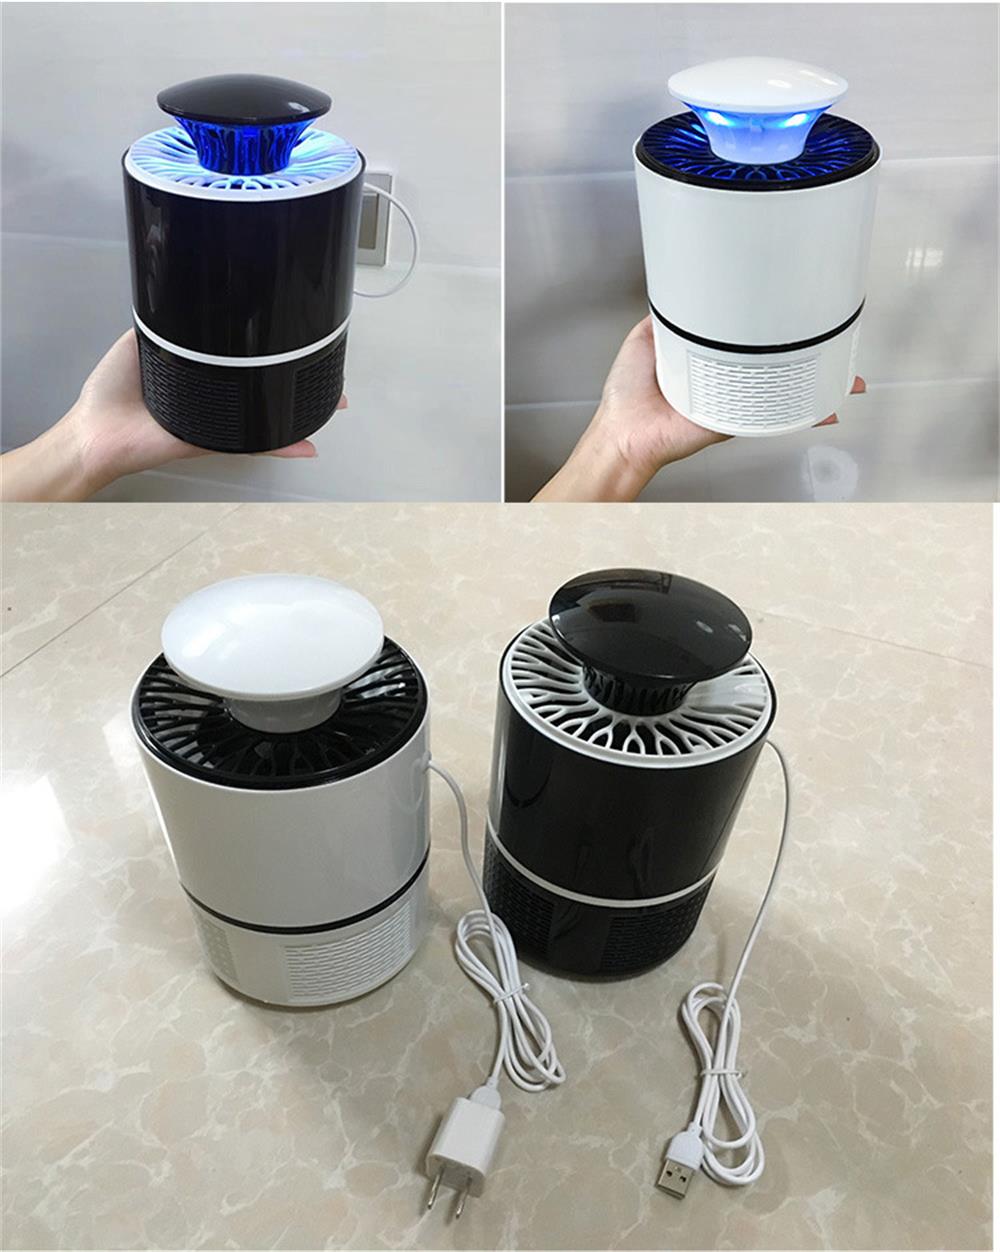 USB Electronic Mosquito/Moth Zapper